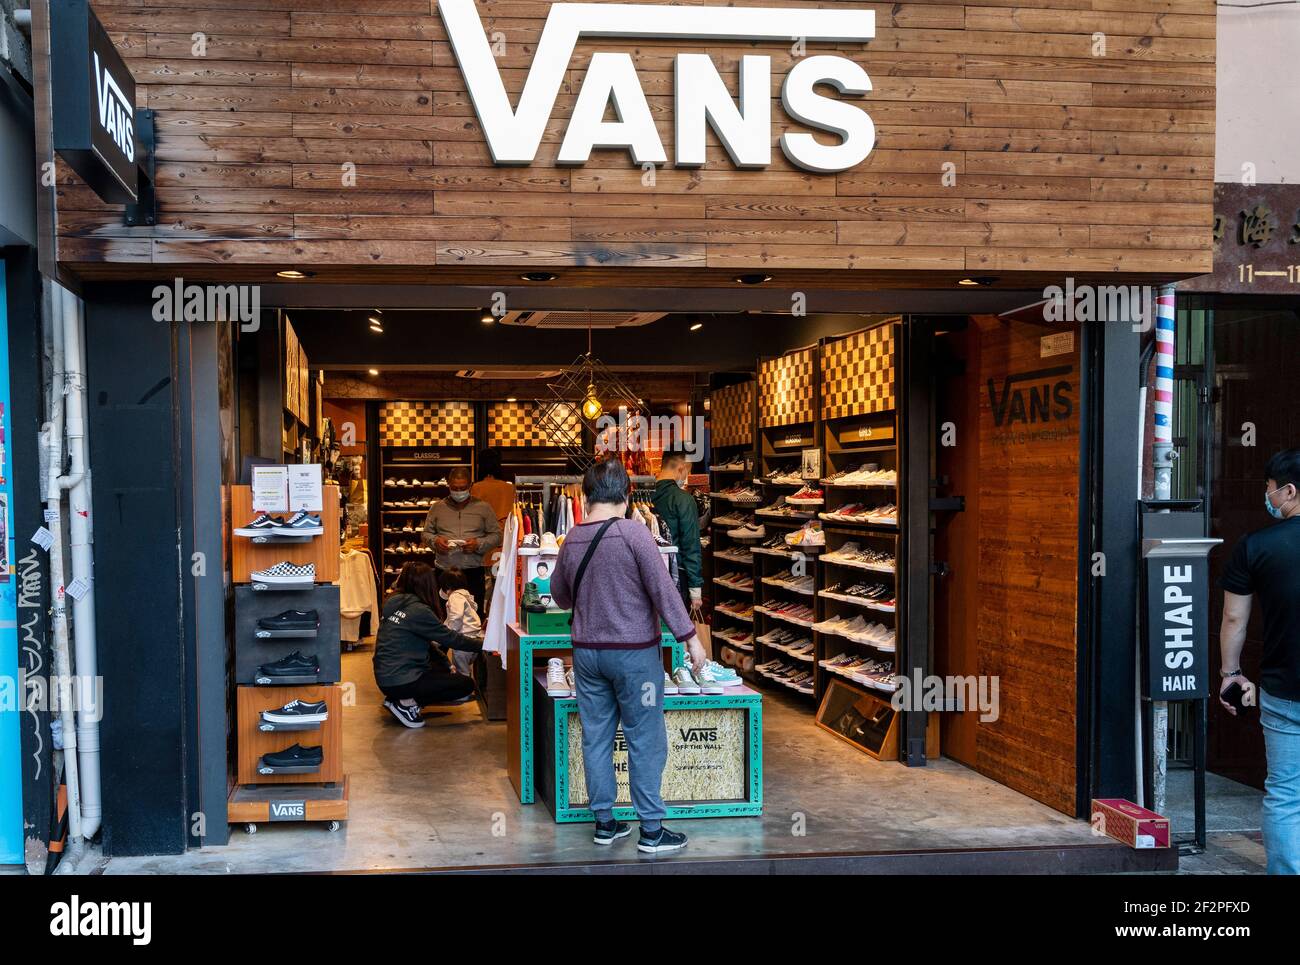 Vans Store High Resolution Stock and Images - Alamy